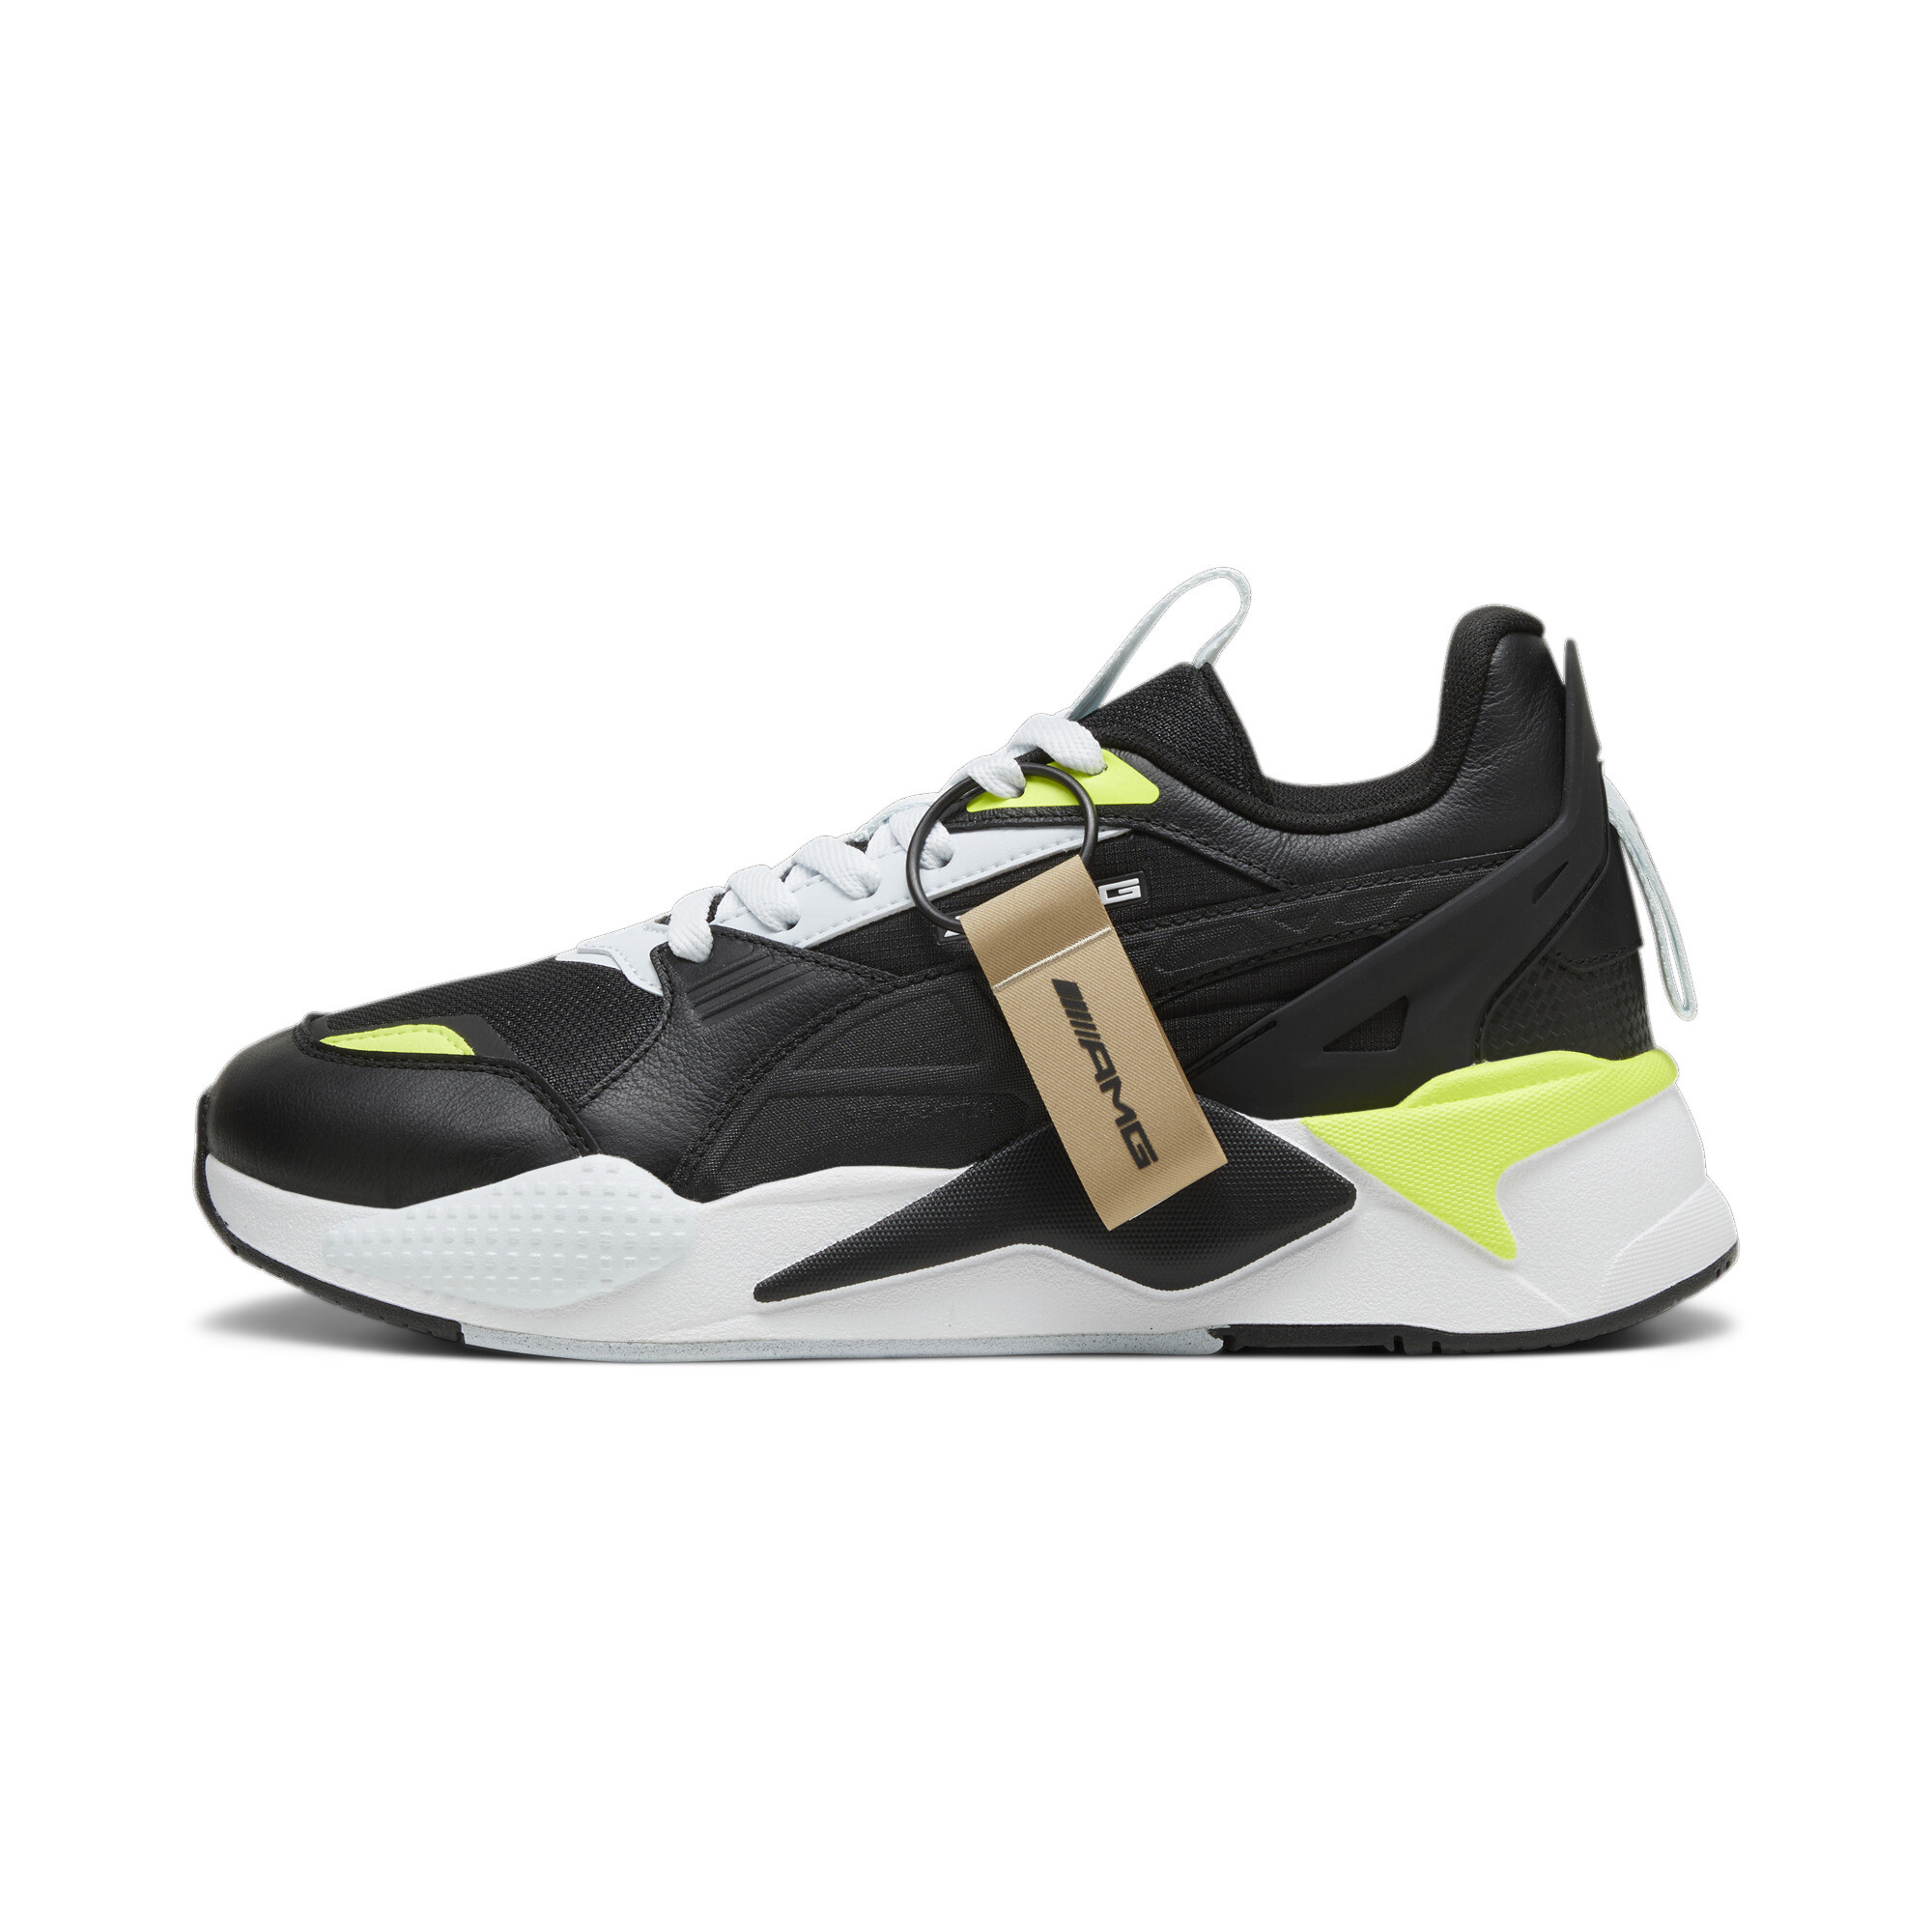 Puma AMG RS-X T Sneakers, Black, Size 39, Shoes